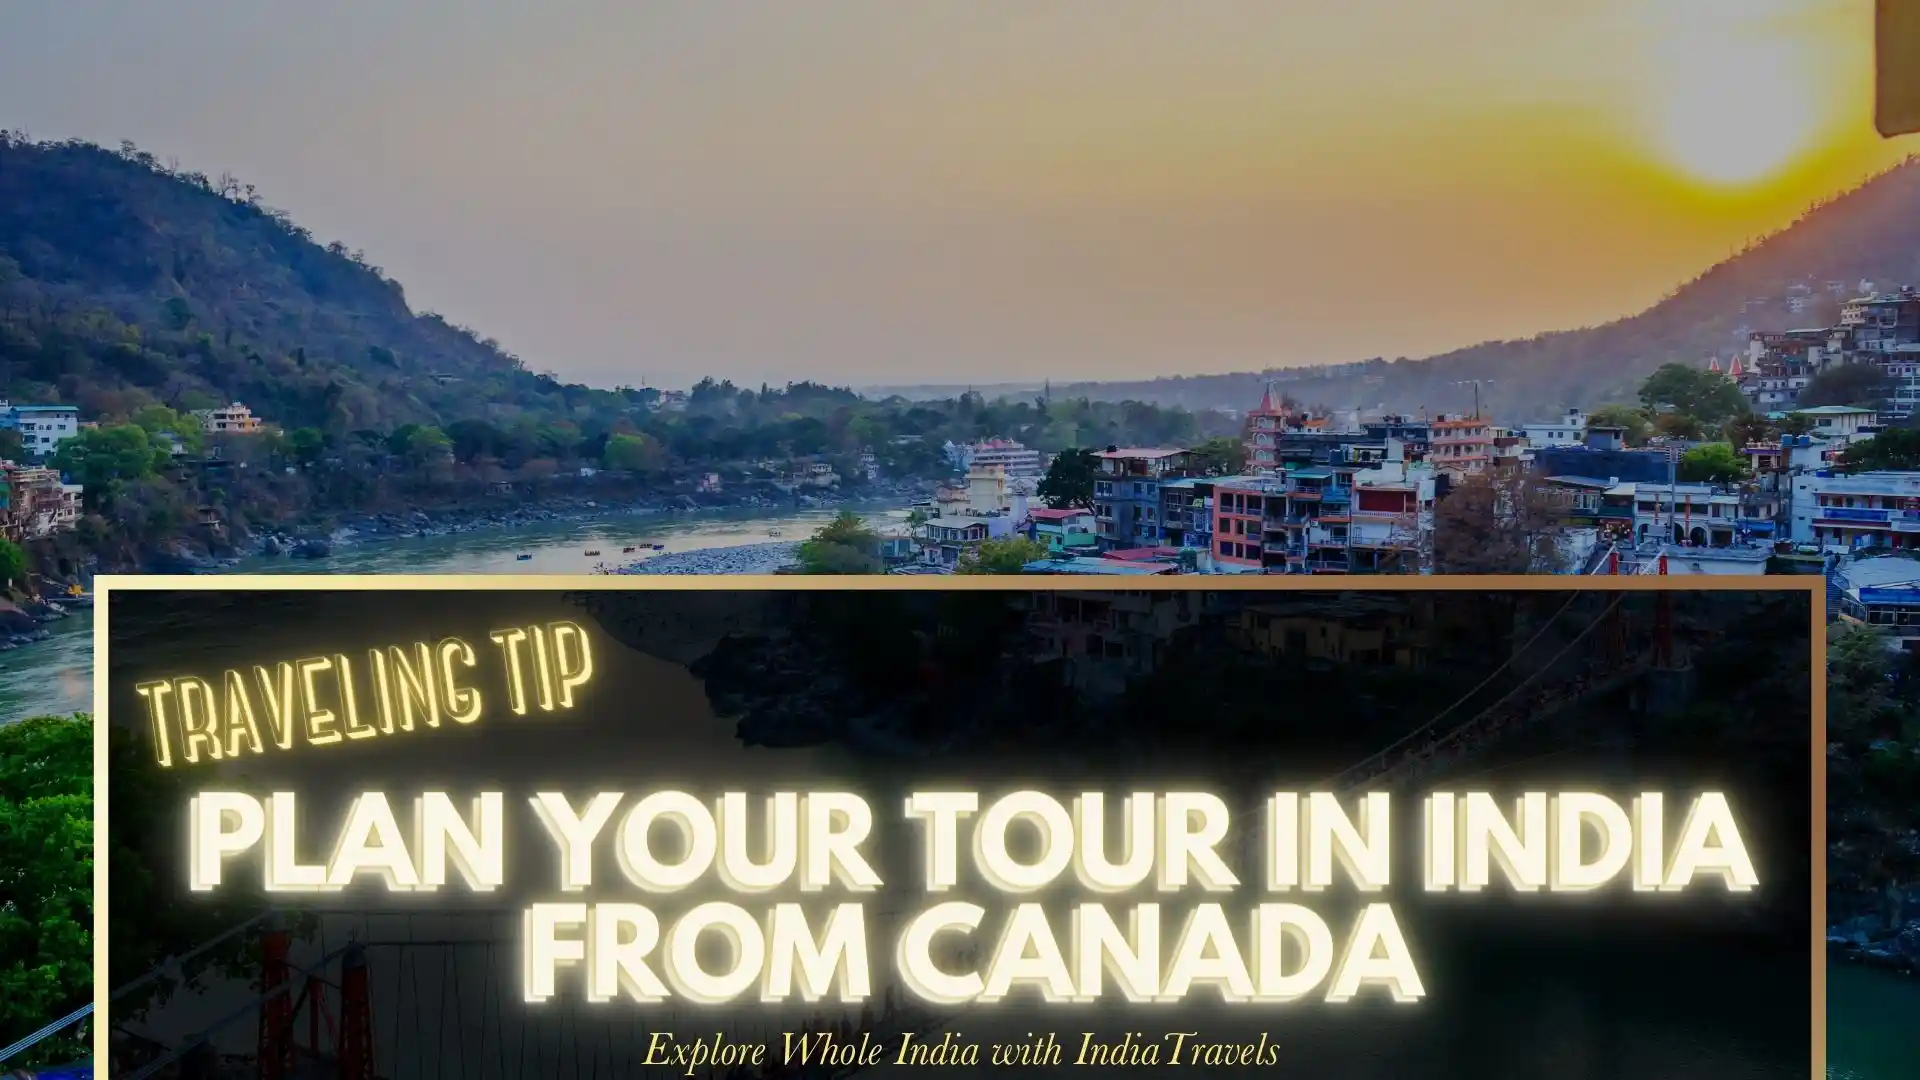 If You are Canadian and Want to Plan Tour in India – Traveling Tips